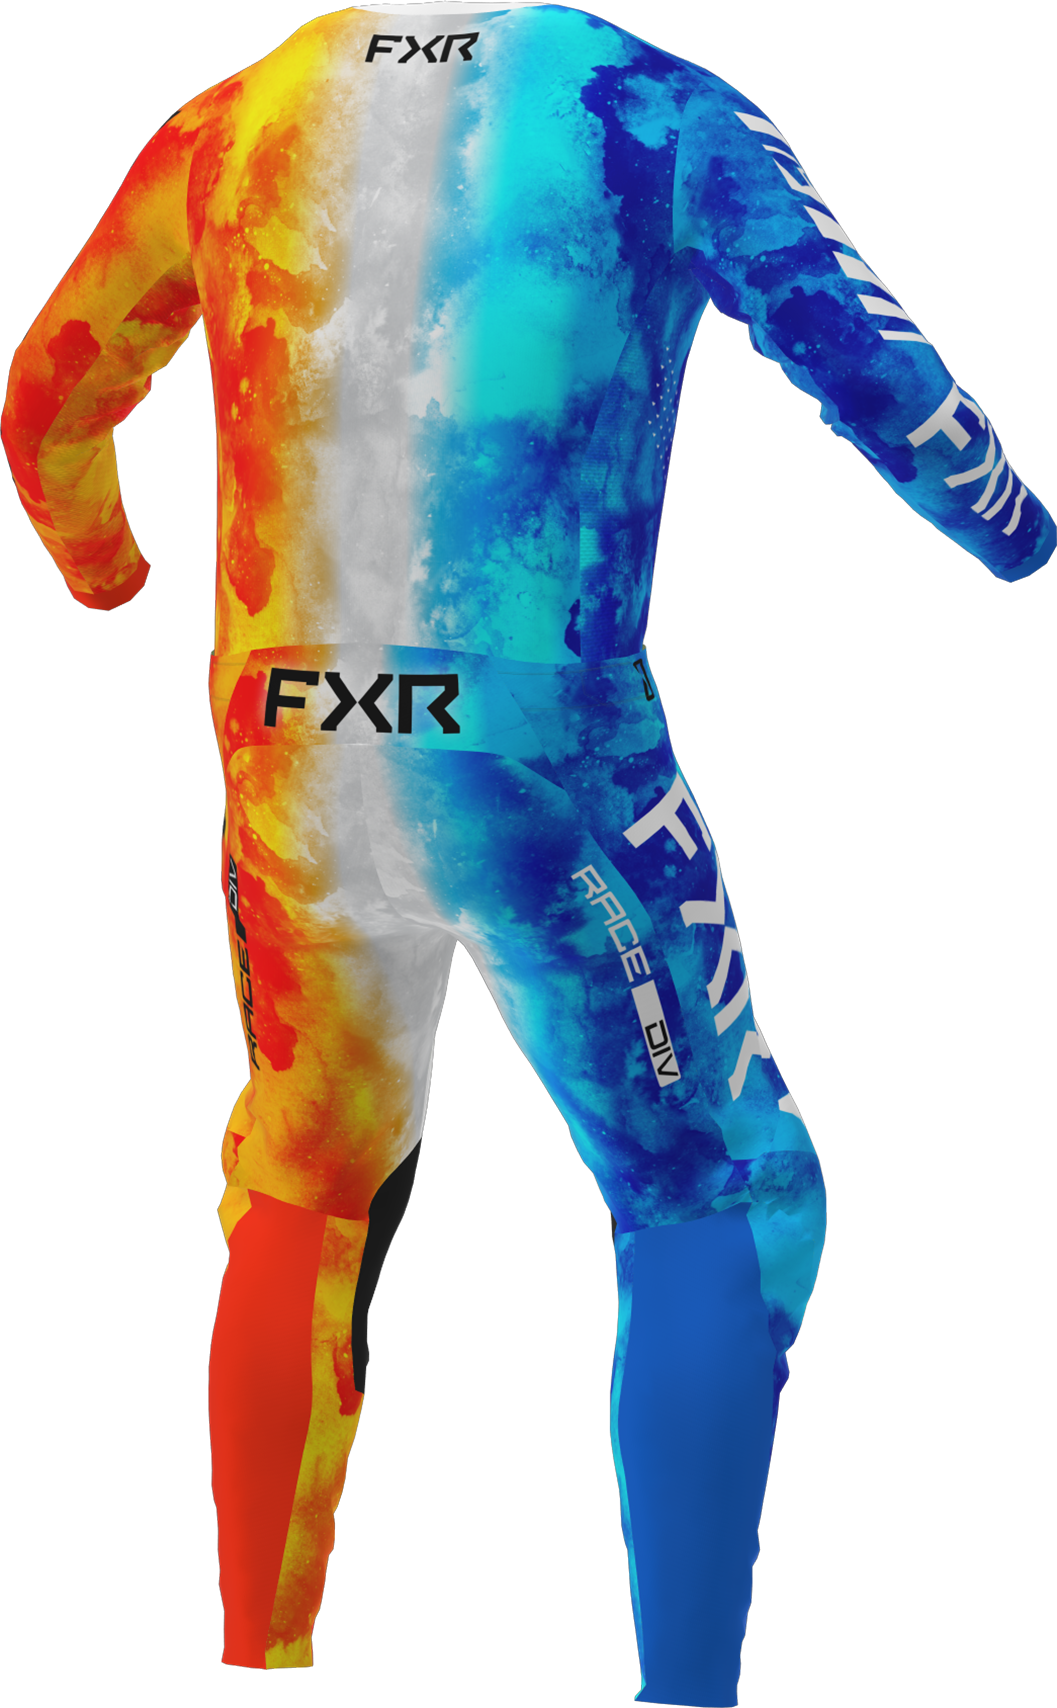 A 3D image of FXR's Podium MX Jersey and Pant in Fire & Ice colorway